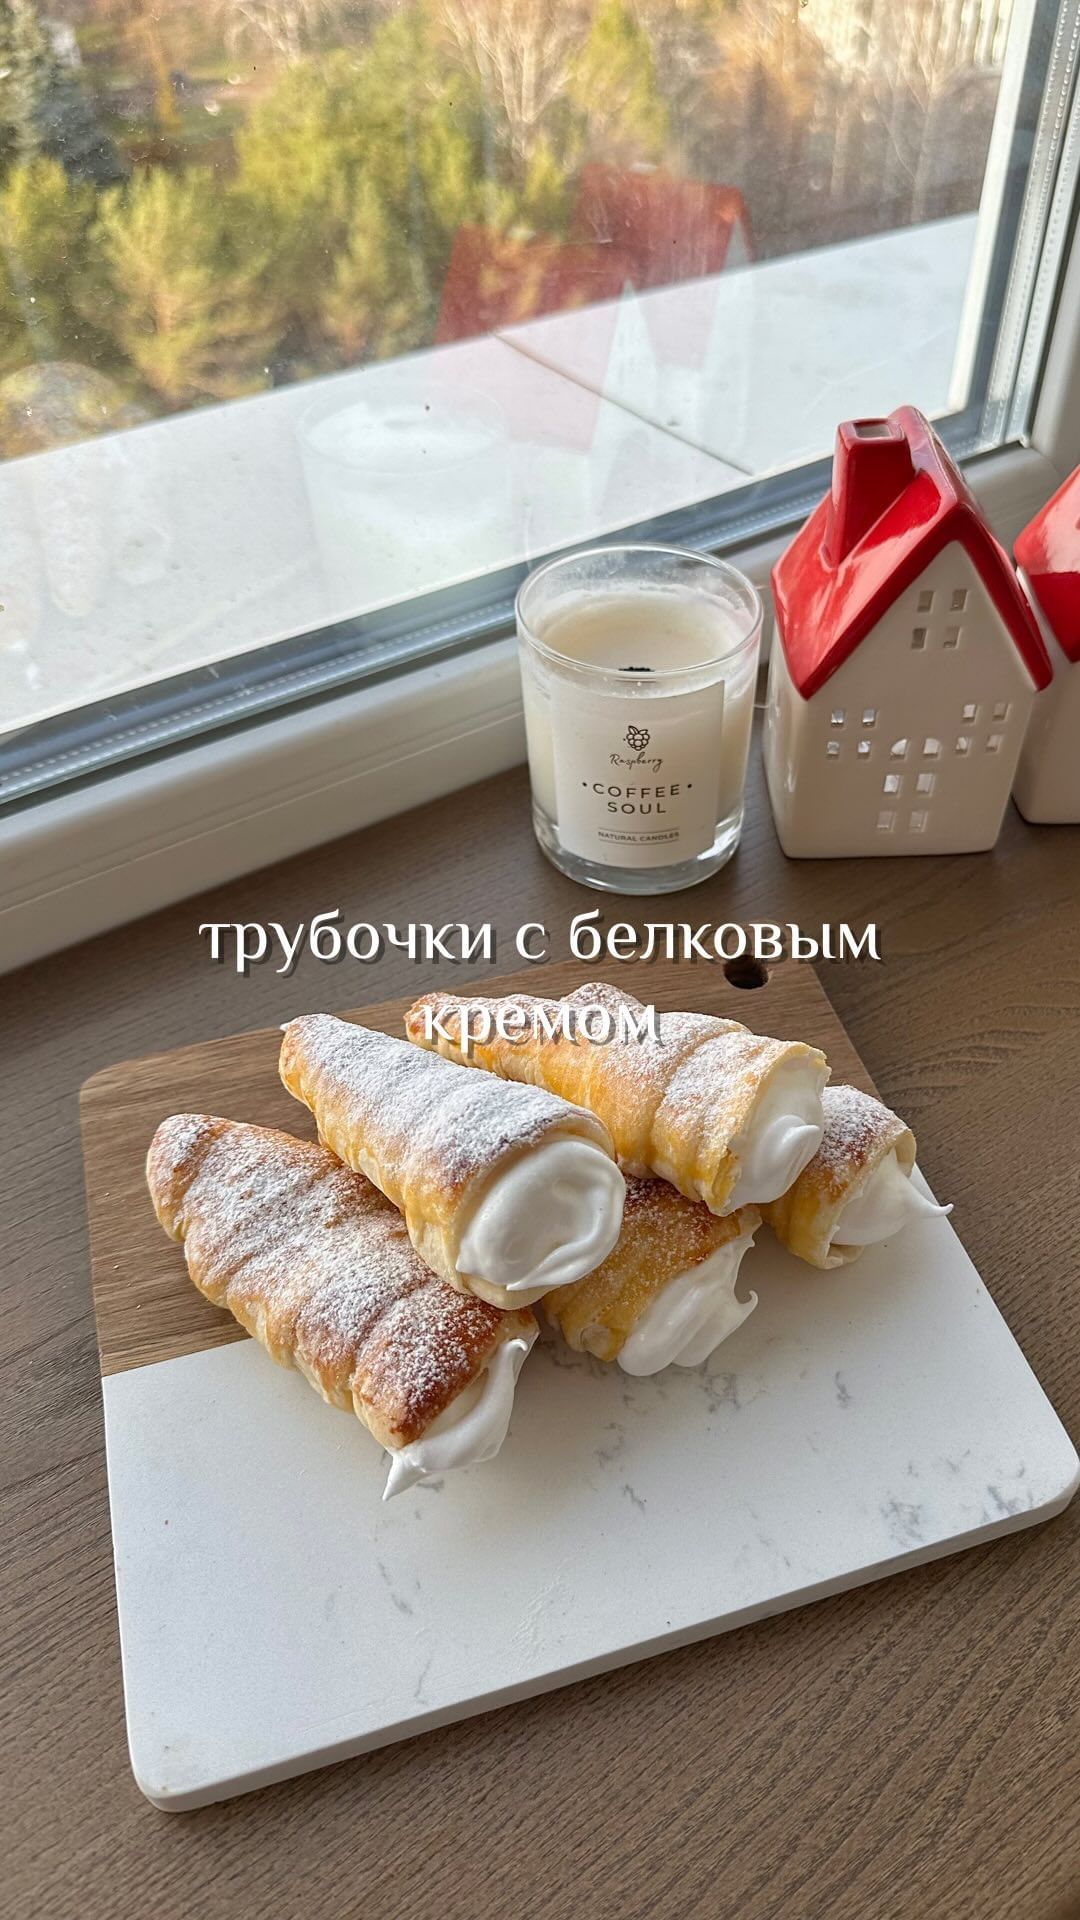 Pastry Tubes with Creamy Filling